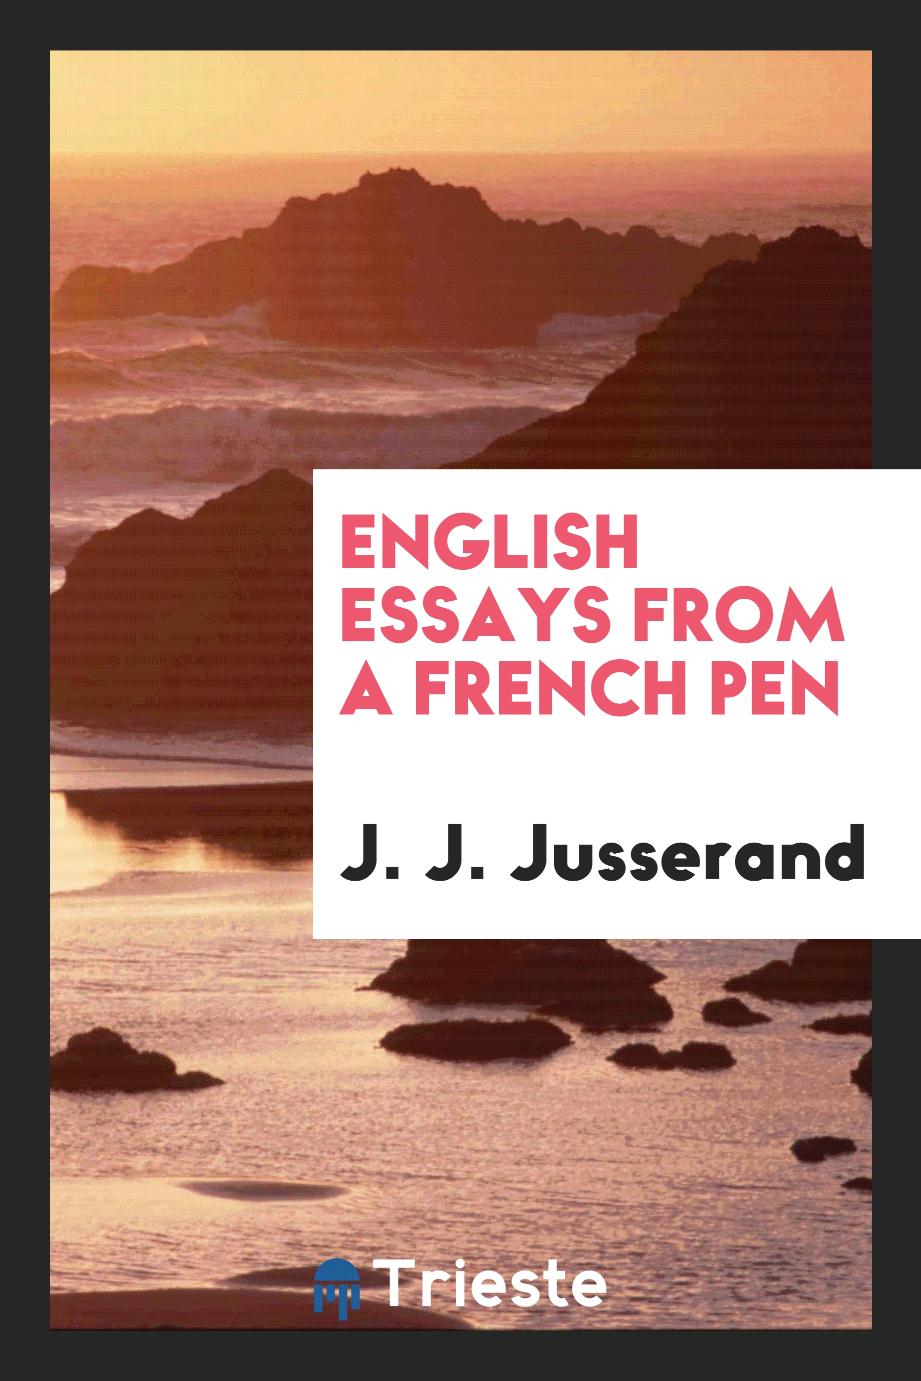 English essays from a French pen